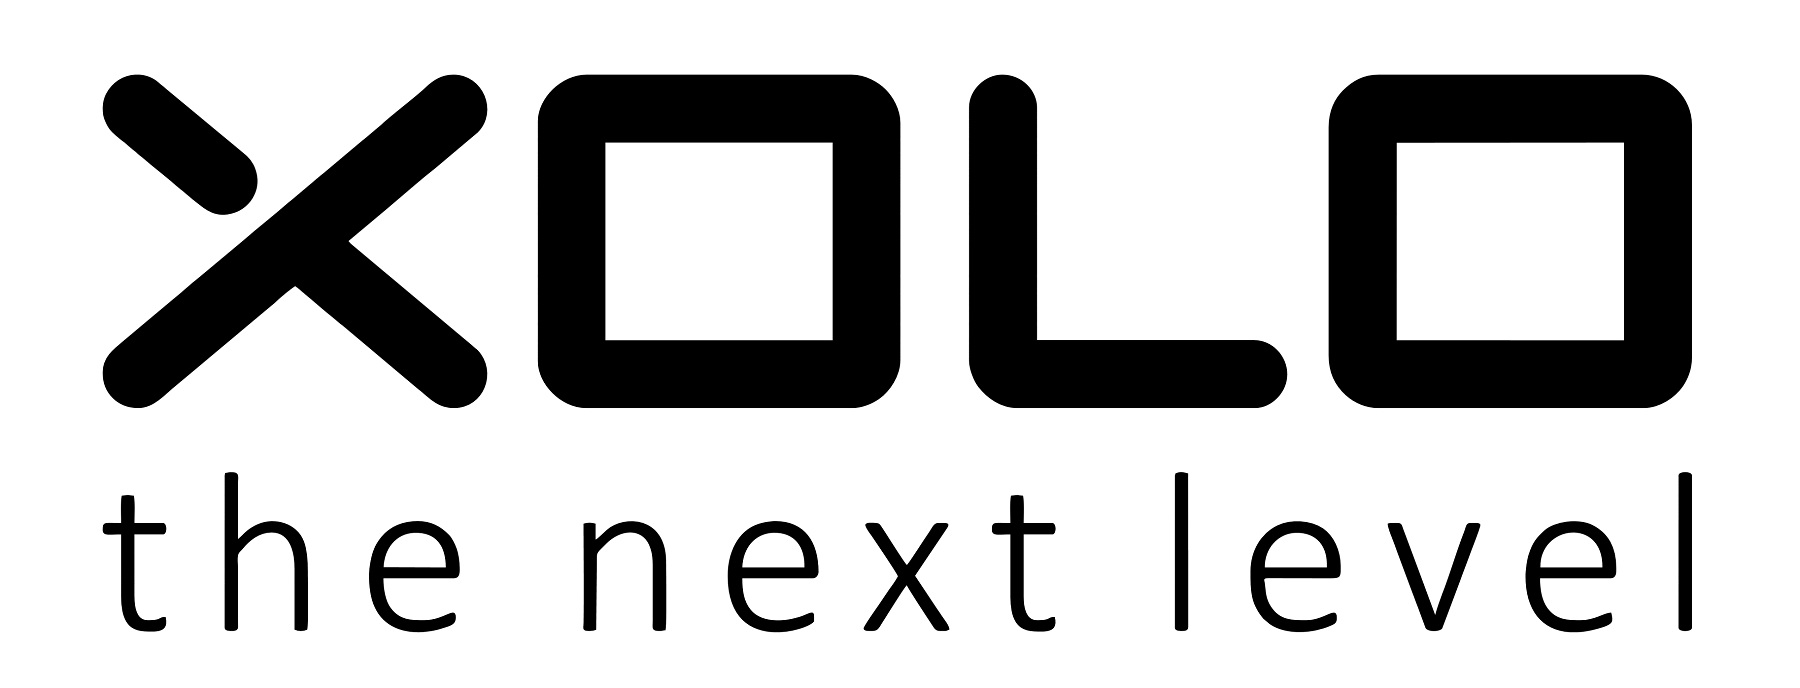 Owner of XOLO Mobile Company Logo and Wiki